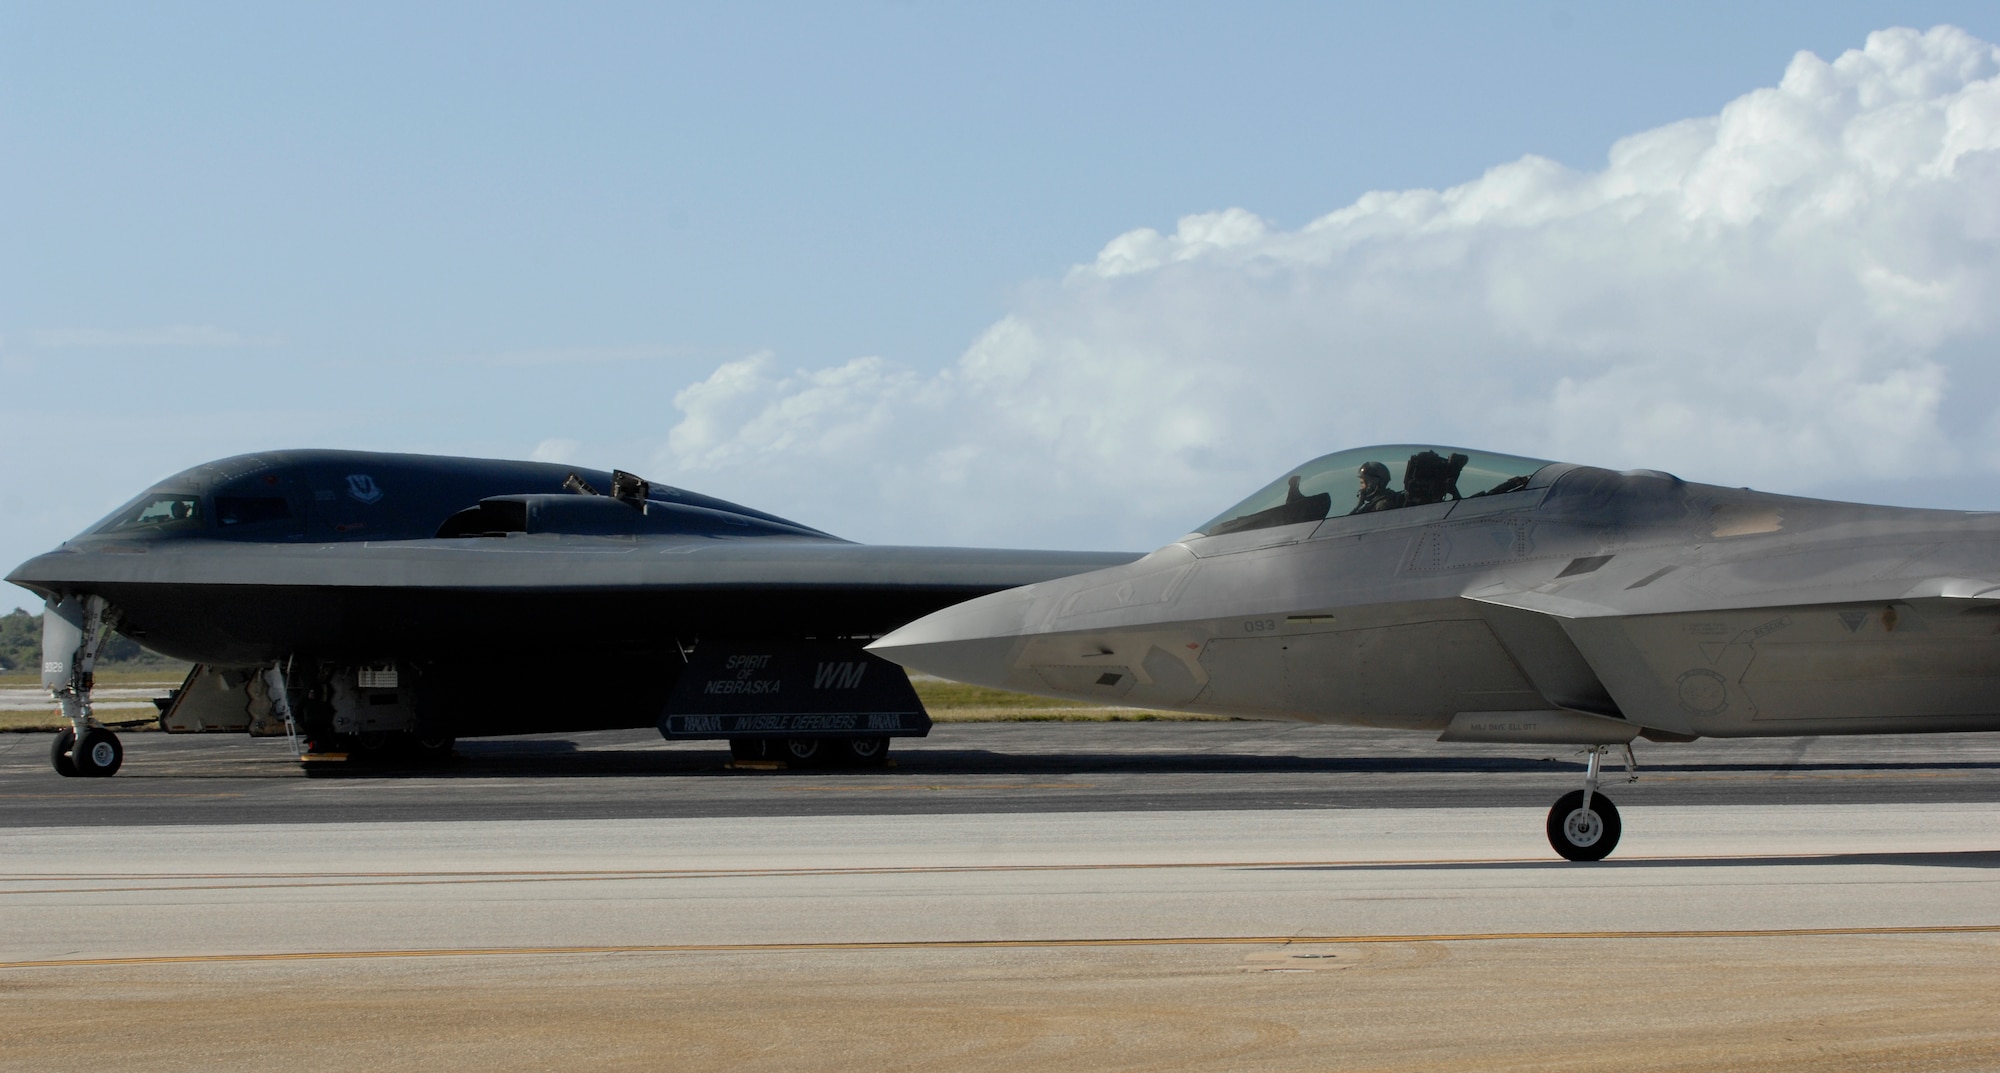 An F-22 Raptor taxis at Andersen Air Force Base, Guam while a B-2 Spirit from the 509th Bomb Wing, 13th Bomb Squadron Whiteman Air Force Base, Mo., waits for clearance March 12.  The Raptors are deployed from Elmendorf Air Force Base, Alaska to the 90th Expeditionary Fighter Squadron at Andersen for a three month deployment as the Pacific's Theater Security Package. The stealth-fighters, along with associated maintenance and support personnel will participate in various exercises that provide routine training in an environment different from their home station. 

(U.S. Air Force photo/ Master Sgt. Kevin J. Gruenwald) released


























  












 











































  












 

























